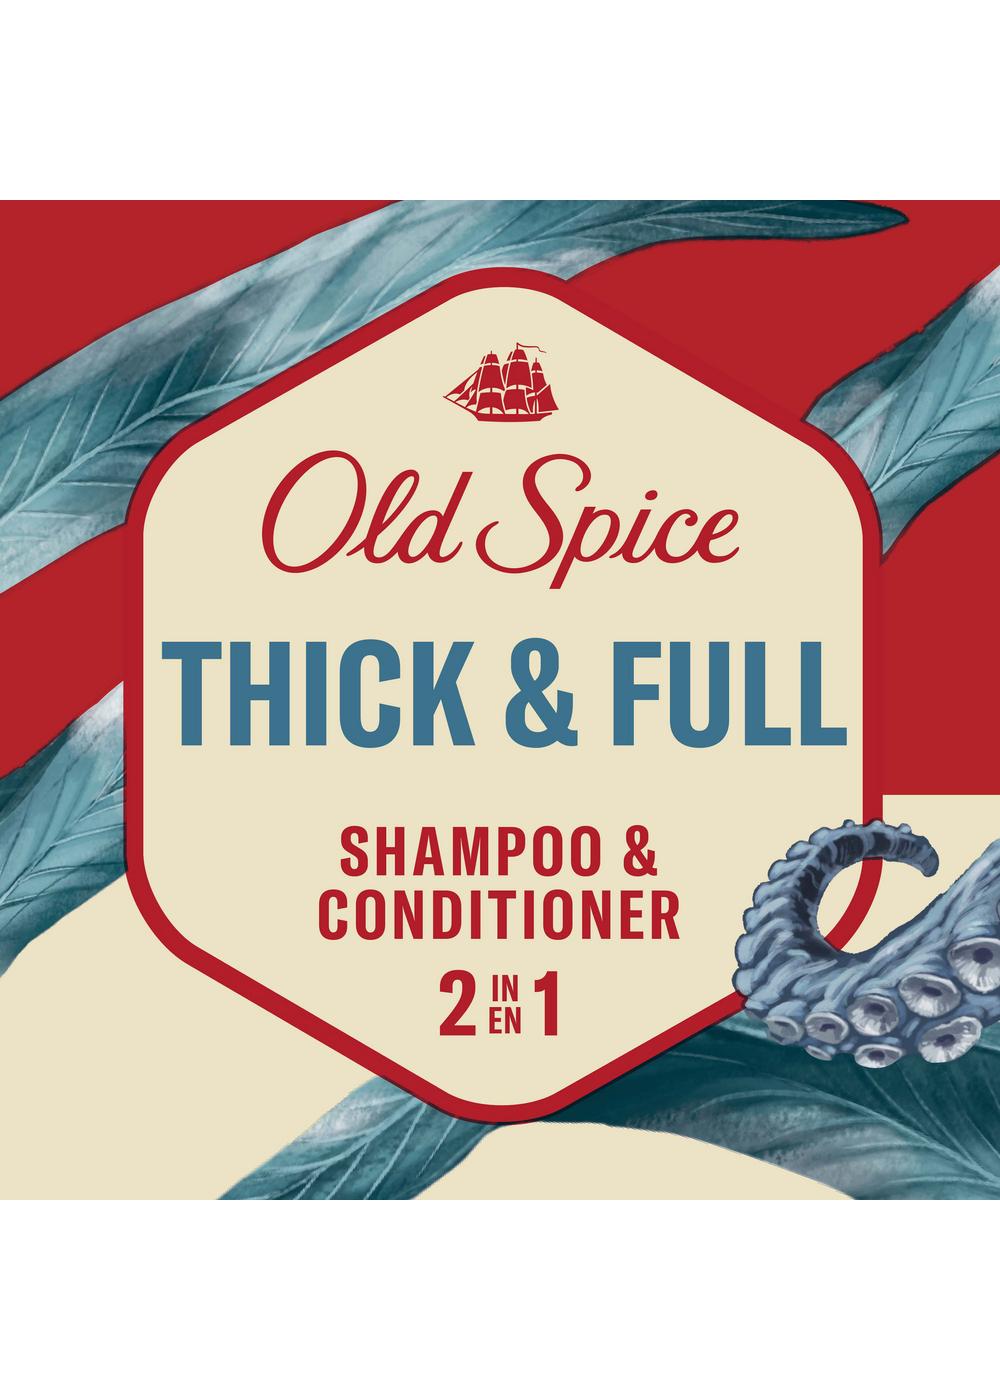 Old Spice Thick & Full 2 in 1 Shampoo & Conditioner - Deep Sea Minerals Scent; image 4 of 7